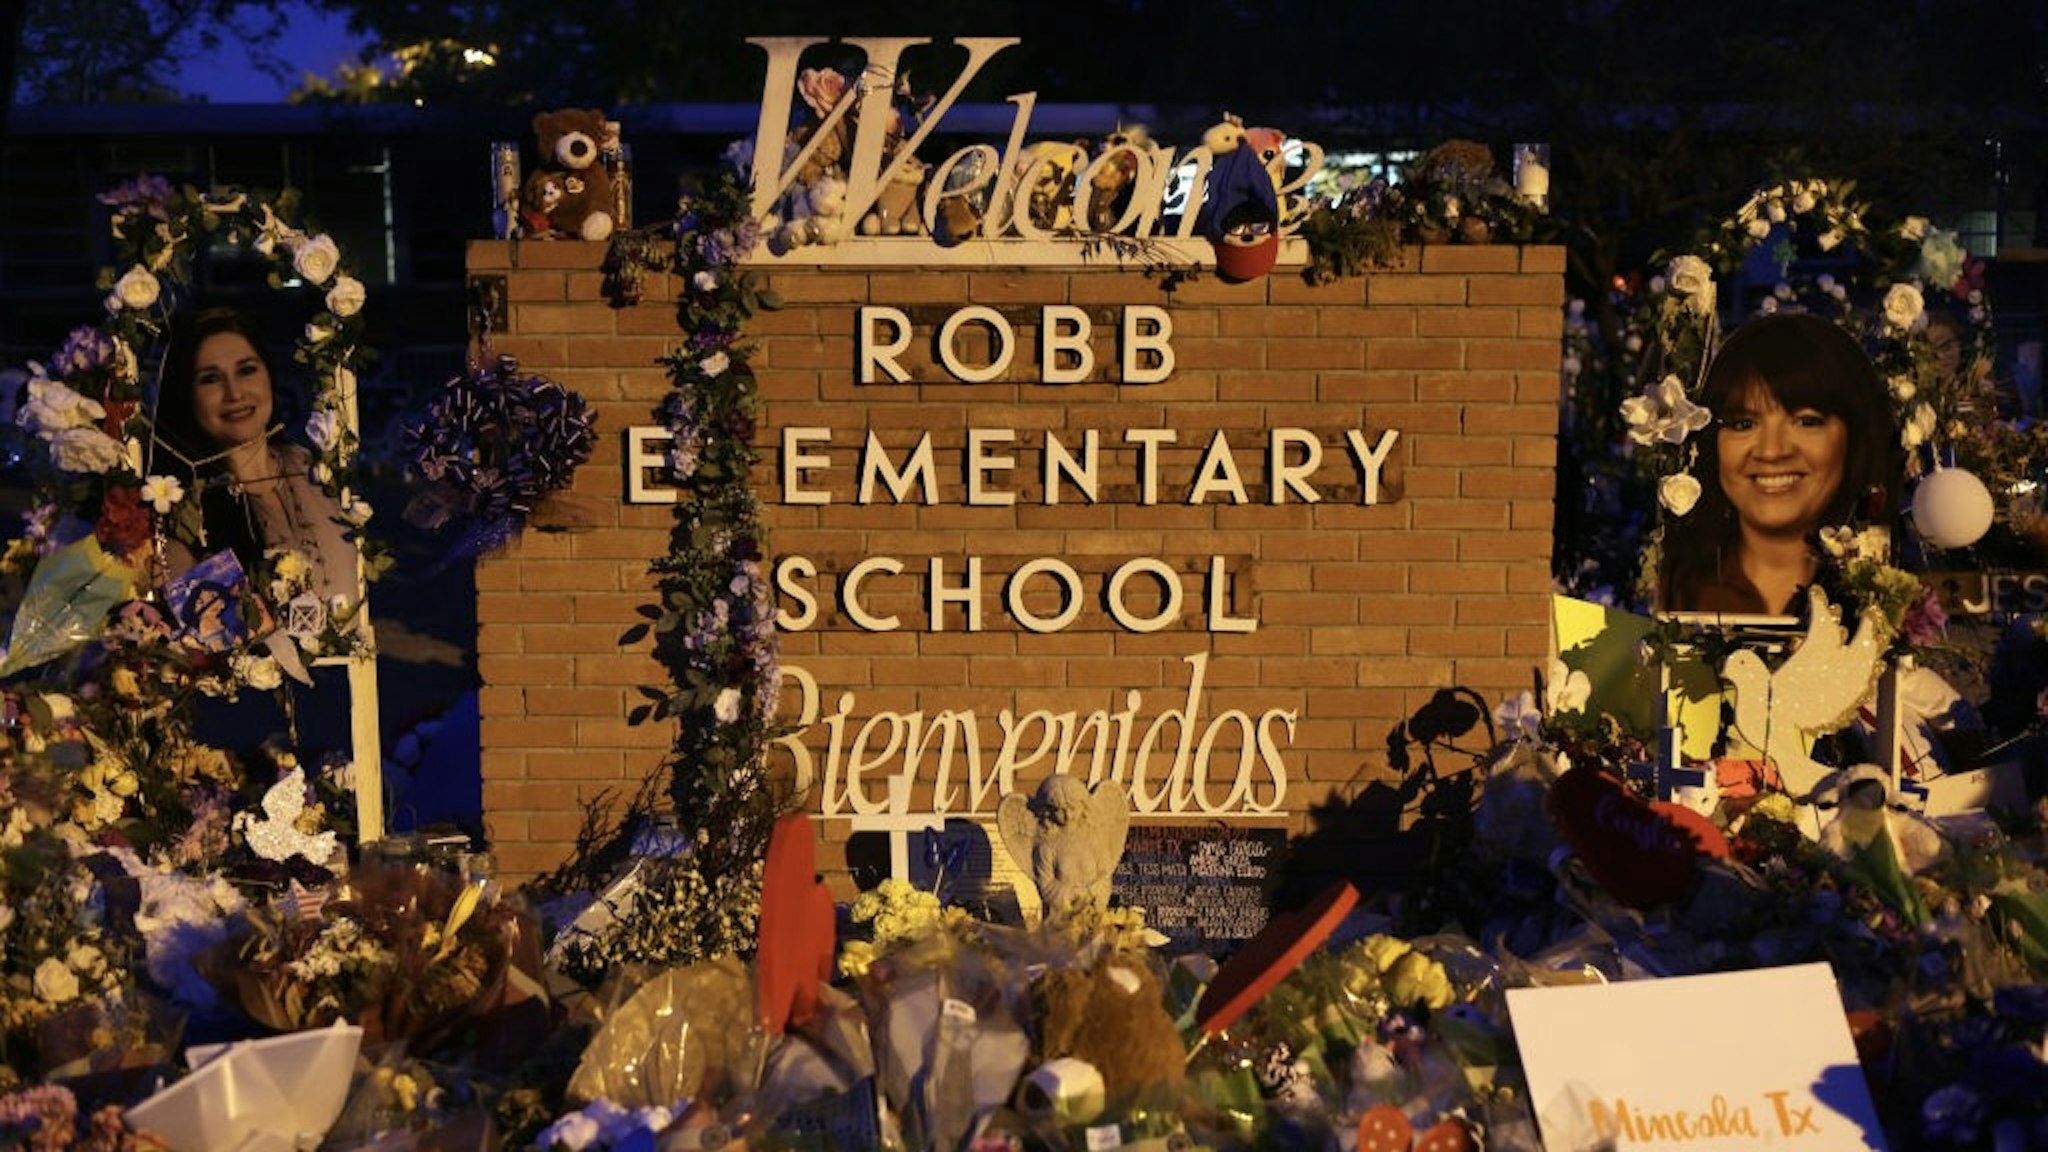 Uvalde Families Grieve For Loved Ones Killed In School Mass Shooting UVALDE, TEXAS - JUNE 03: Flowers and photographs are seen at a memorial dedicated to the victims of the mass shooting at Robb Elementary School on June 3, 2022 in Uvalde, Texas. 19 students and two teachers were killed on May 24 after an 18-year-old gunman opened fire inside the school. Wakes and funerals for the 21 victims are scheduled throughout the week. (Photo by Alex Wong/Getty Images) Alex Wong / Staff